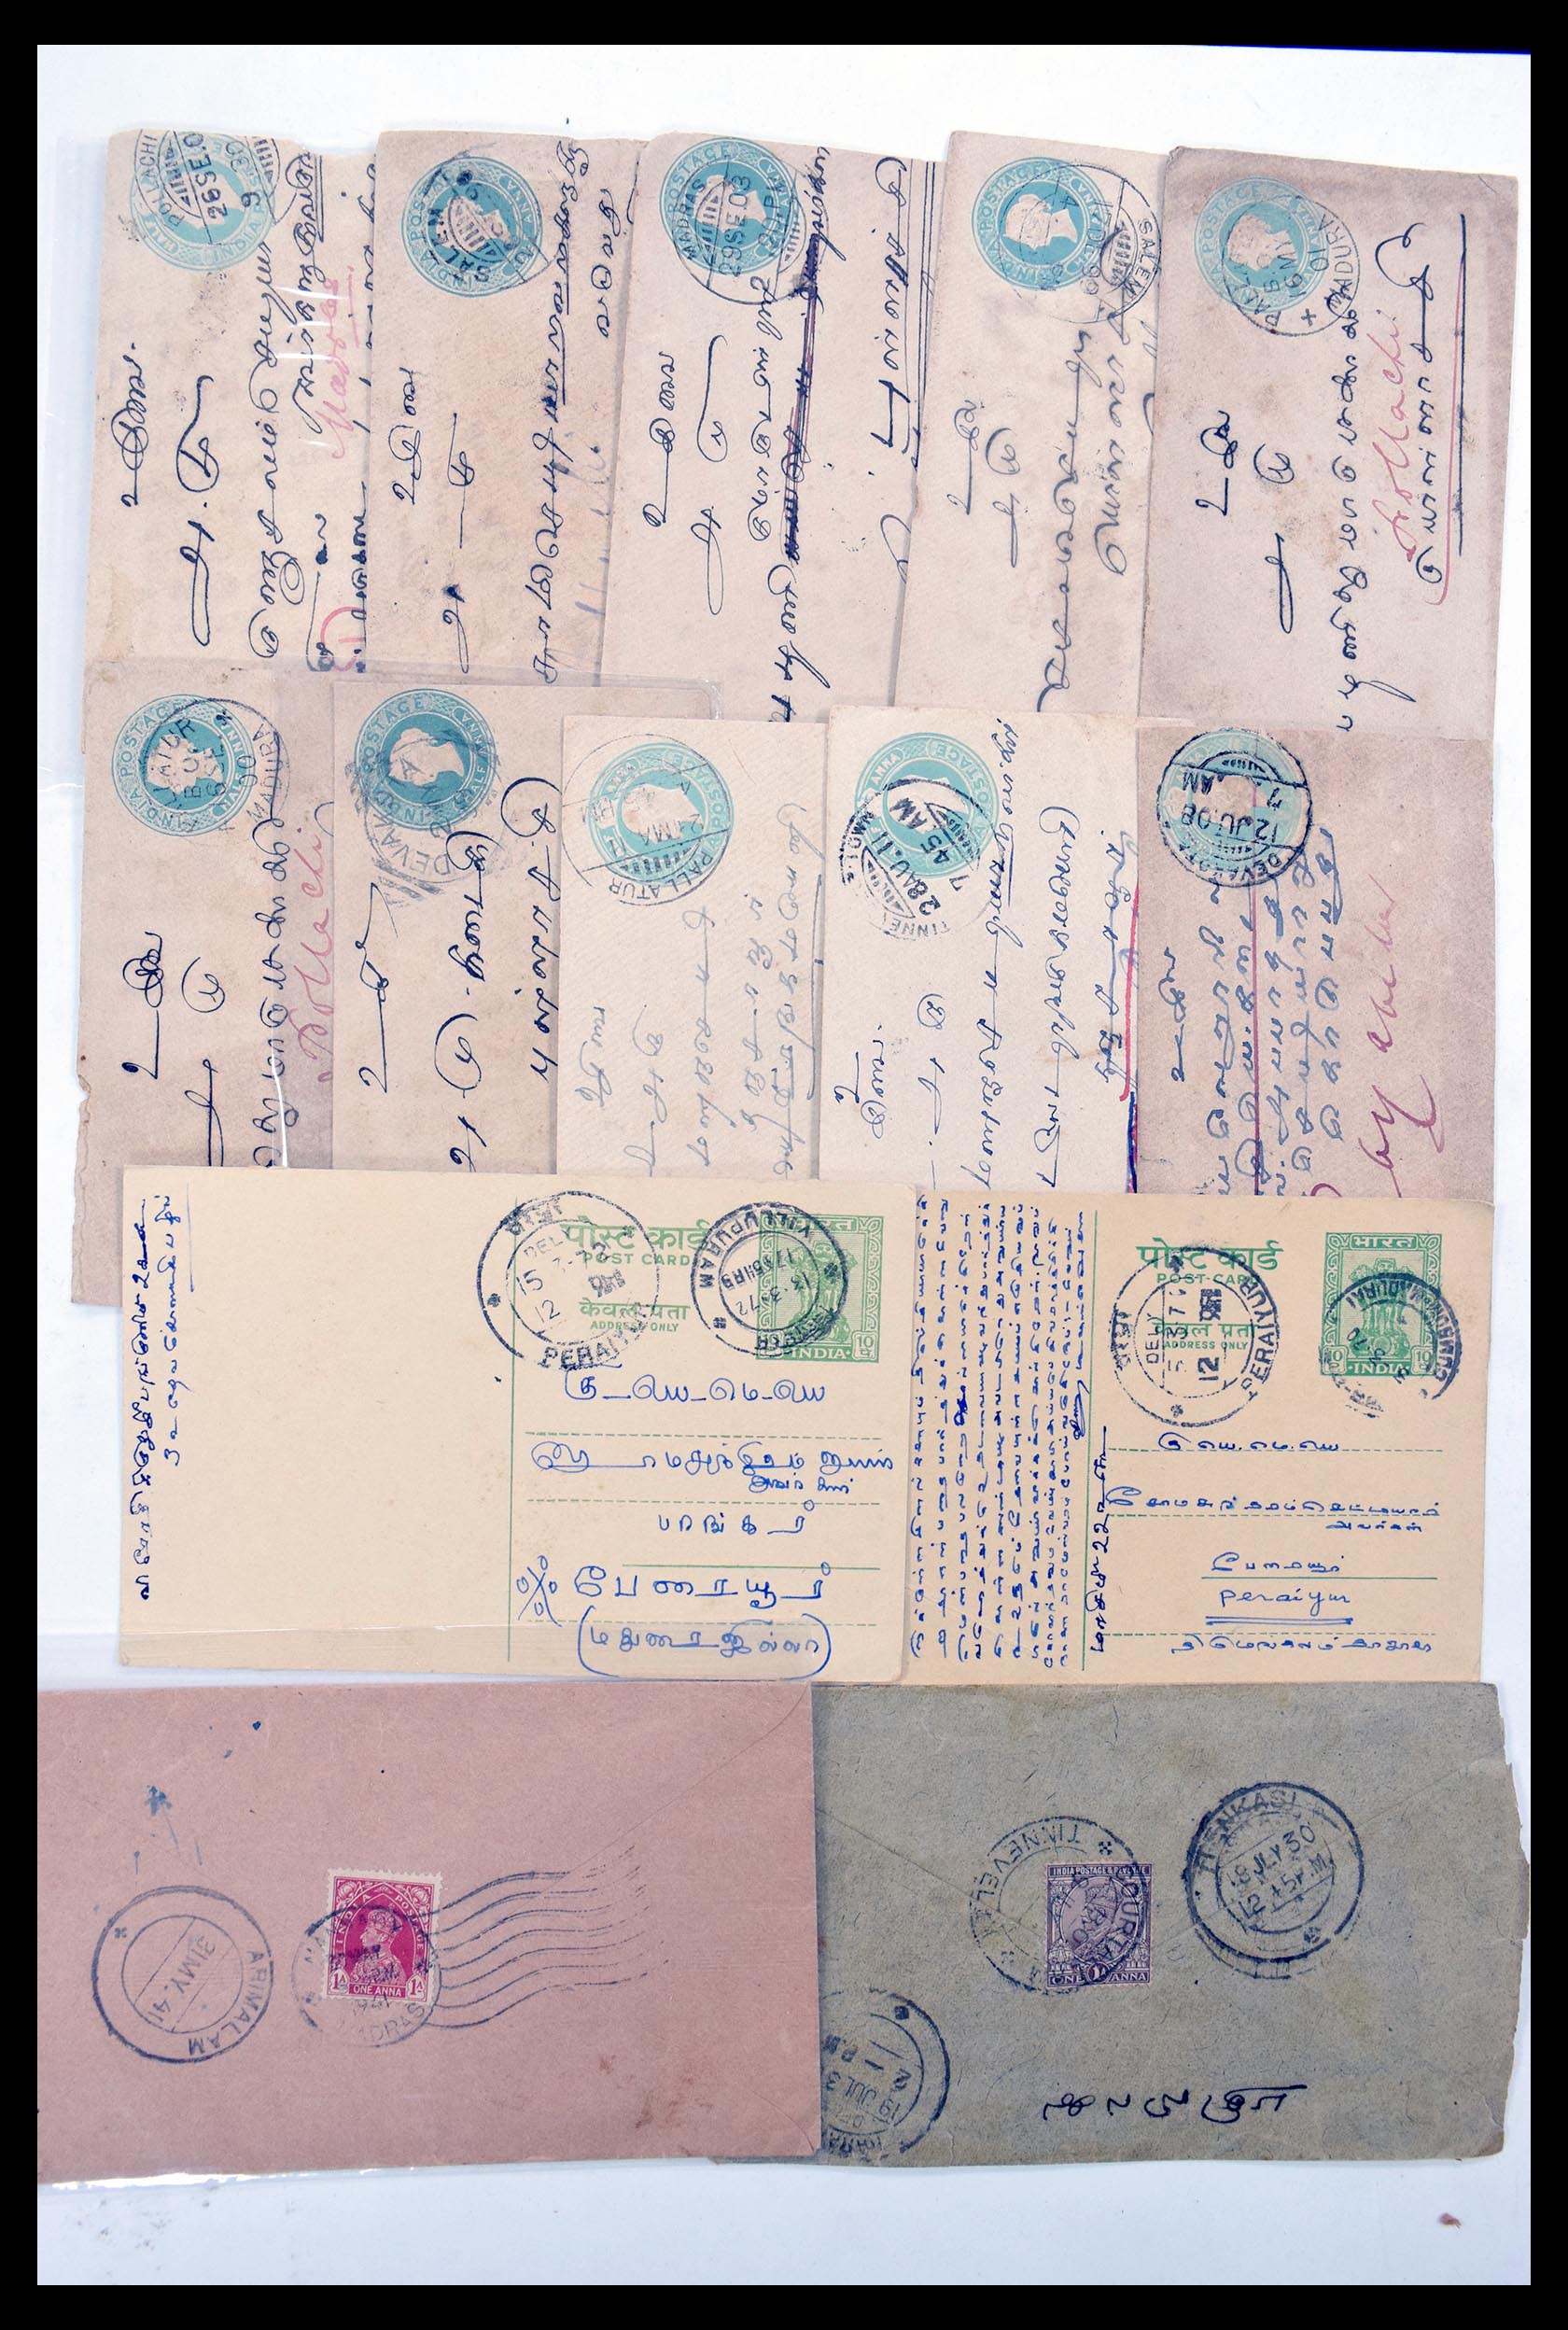 30386 040 - 30386 India covers 1900-1950.